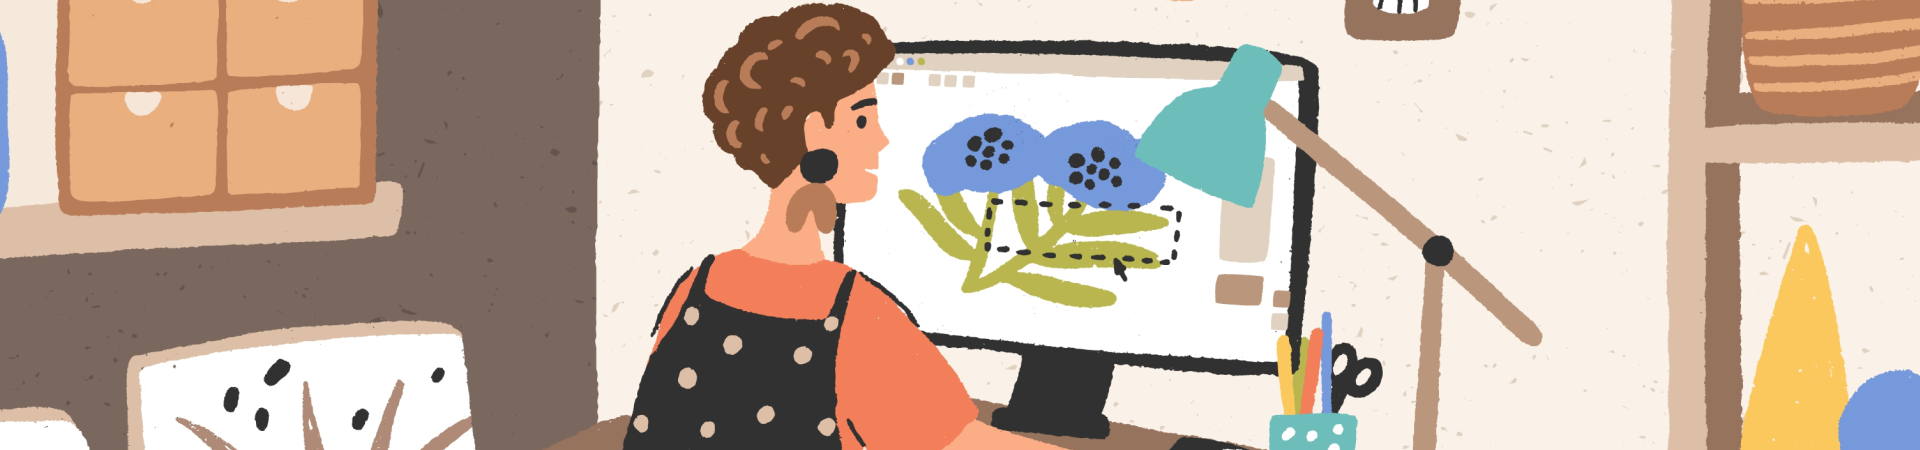 woman draw flower in computer